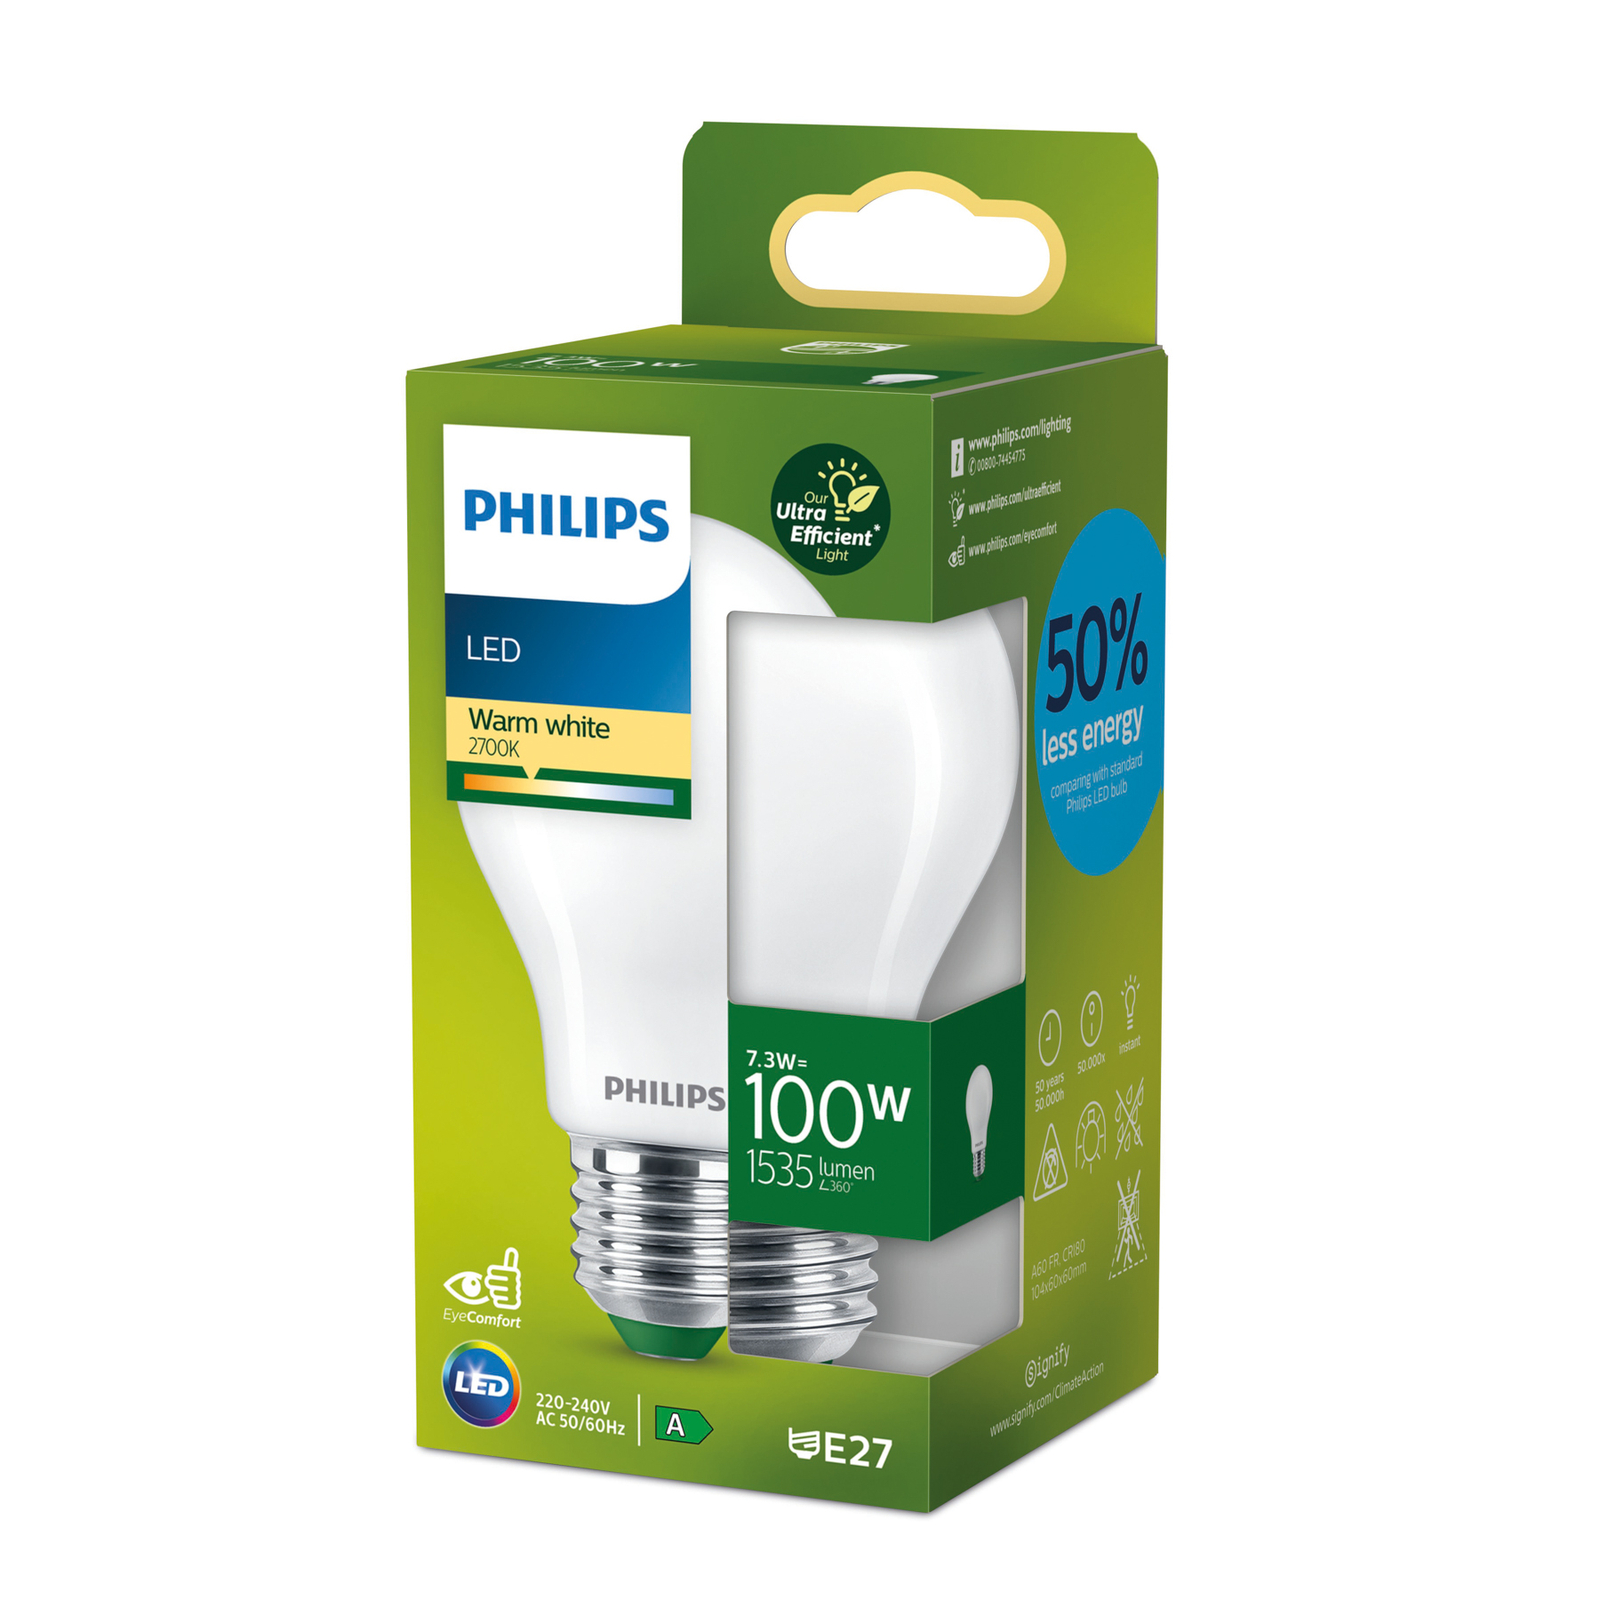 Philips E27 Lamp A60 7.3W 1535lm 2,700K mate